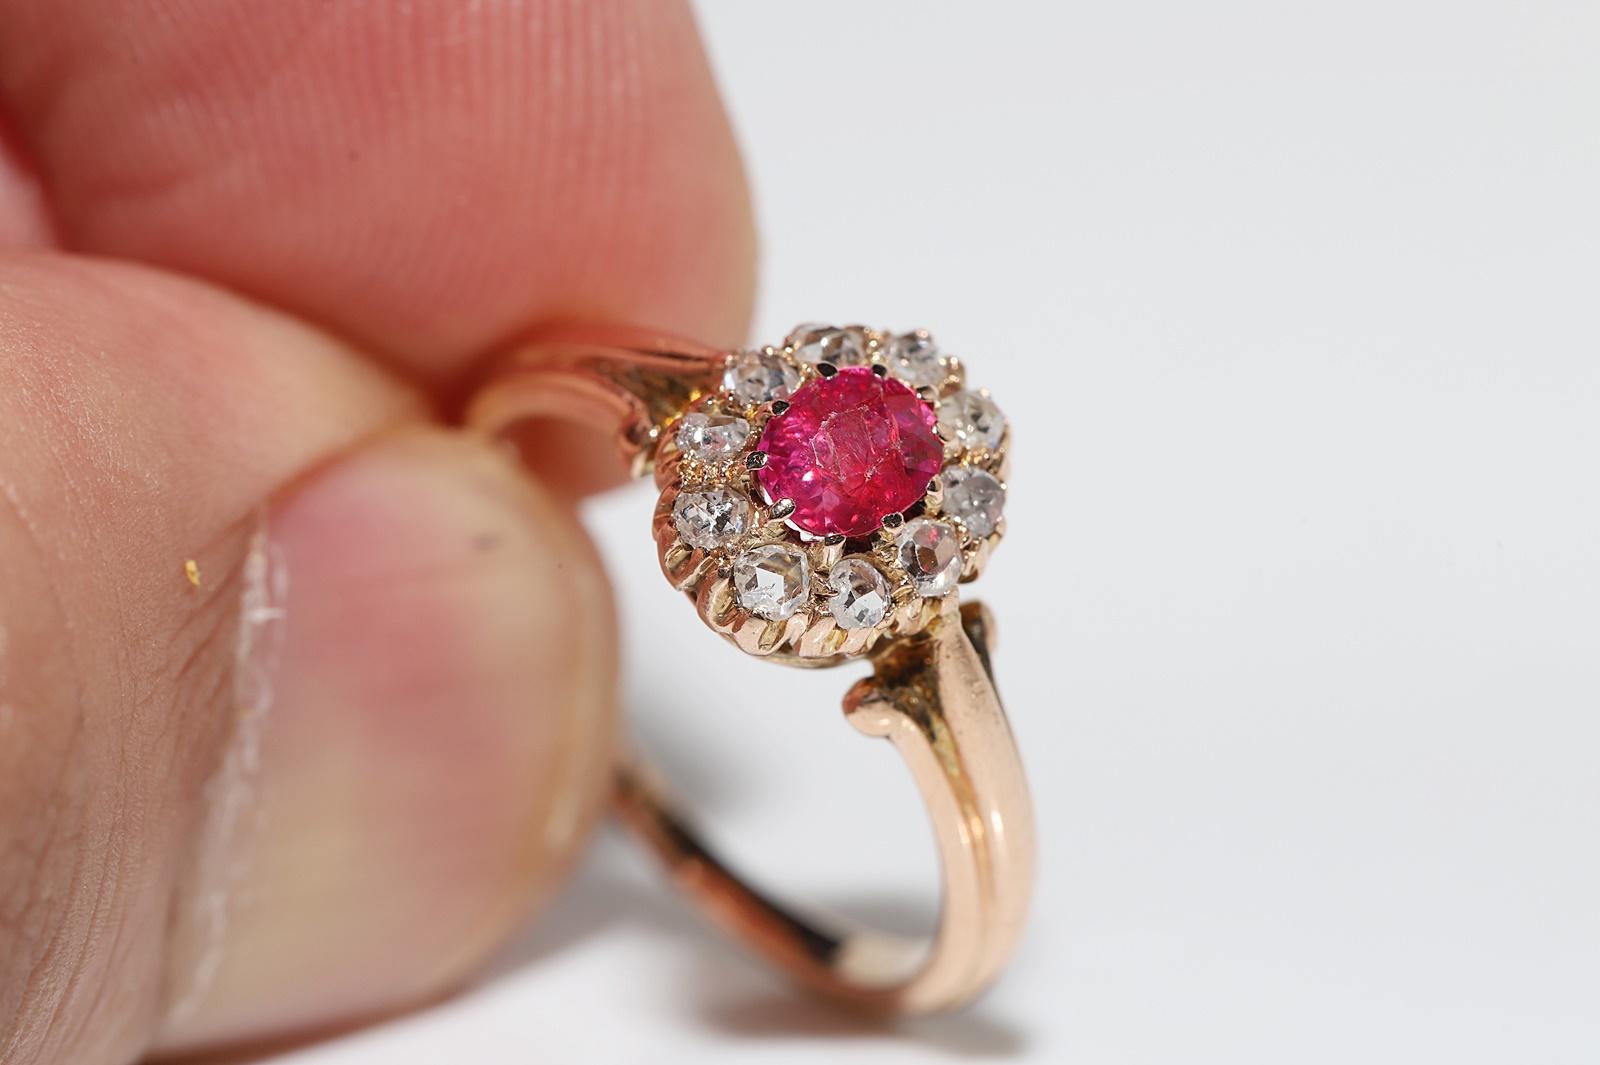 Antique Circa 1900s 14k Gold Natural Rose Cut Diamond And Ruby Decorated Ring For Sale 5